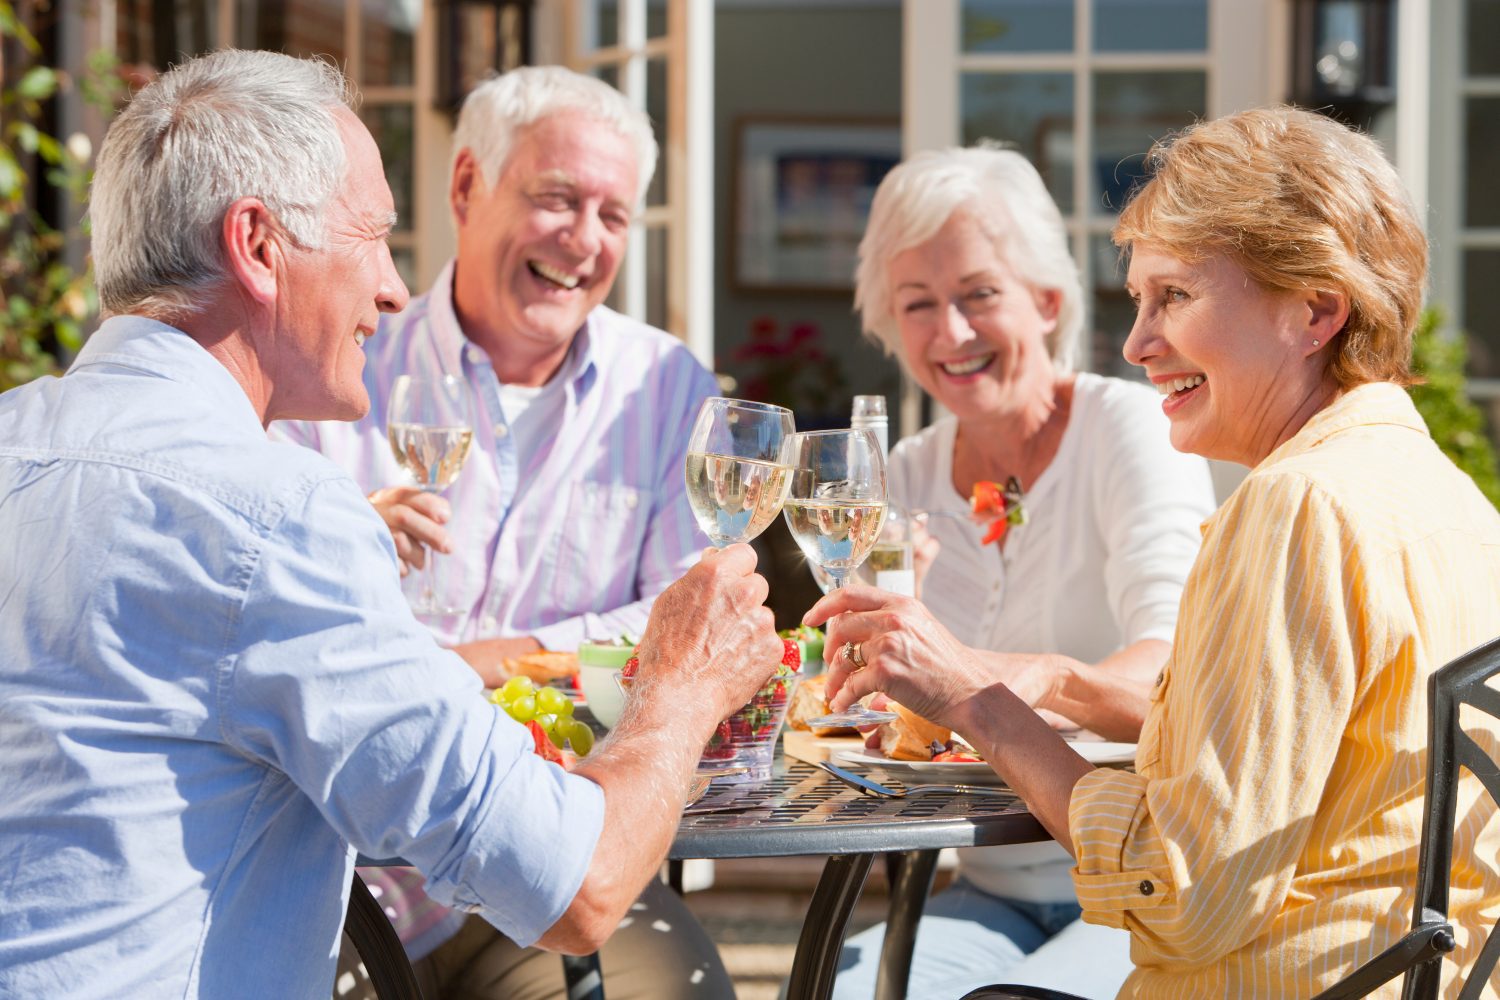 Medium shot of an elderly couple having lunch and toasting wine glasses at the patio table with friends.